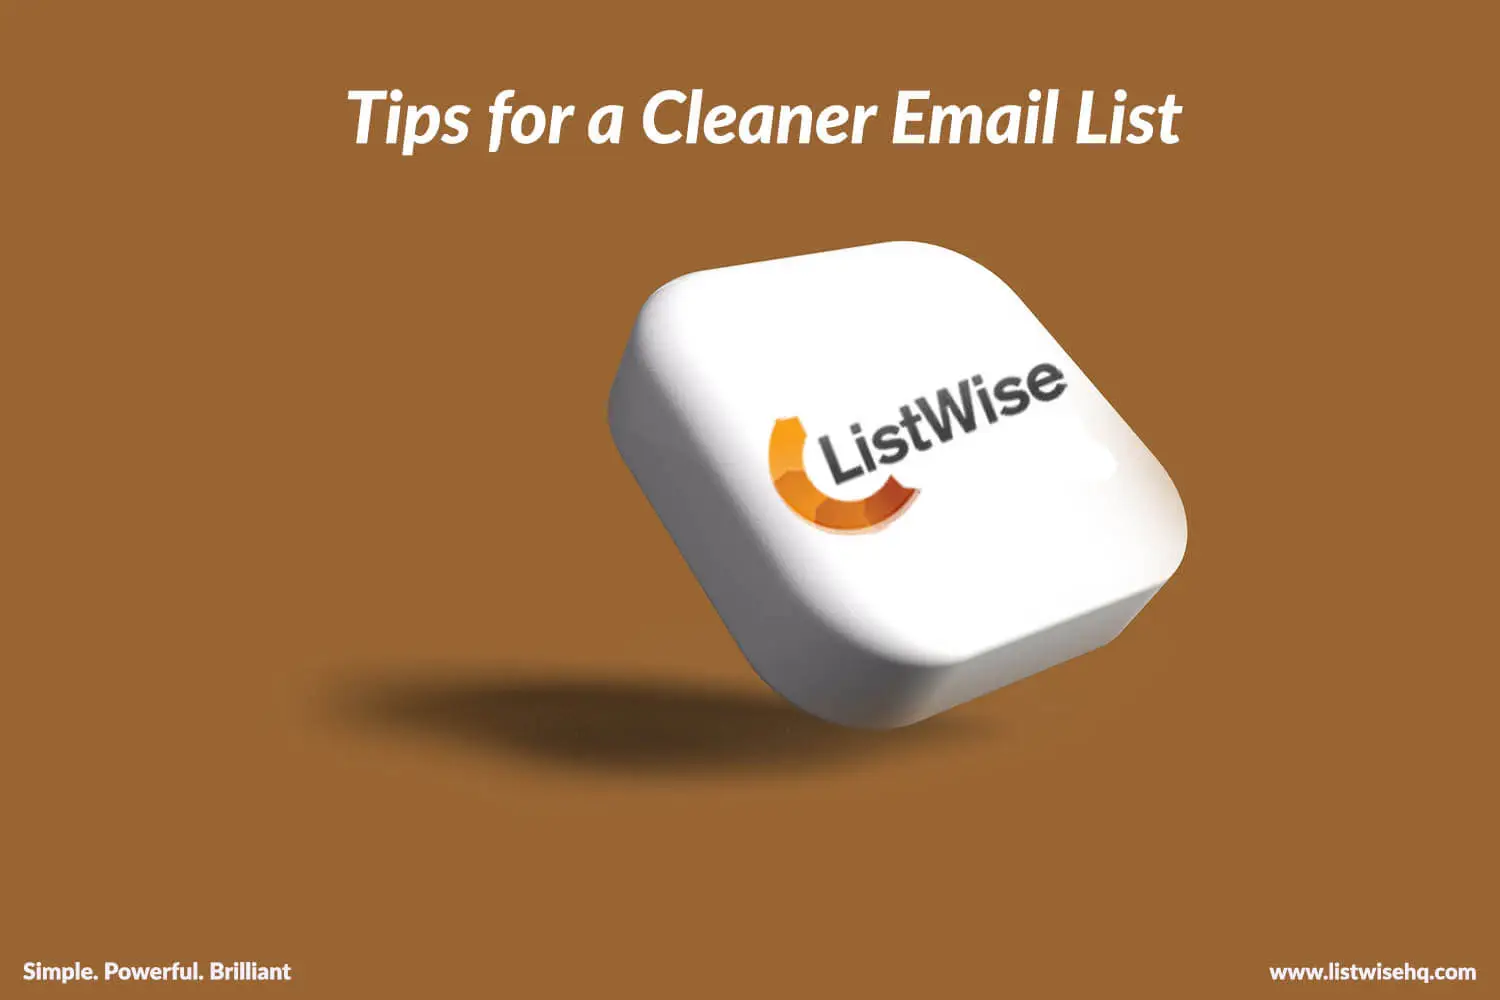 Tips for a Cleaner Email List